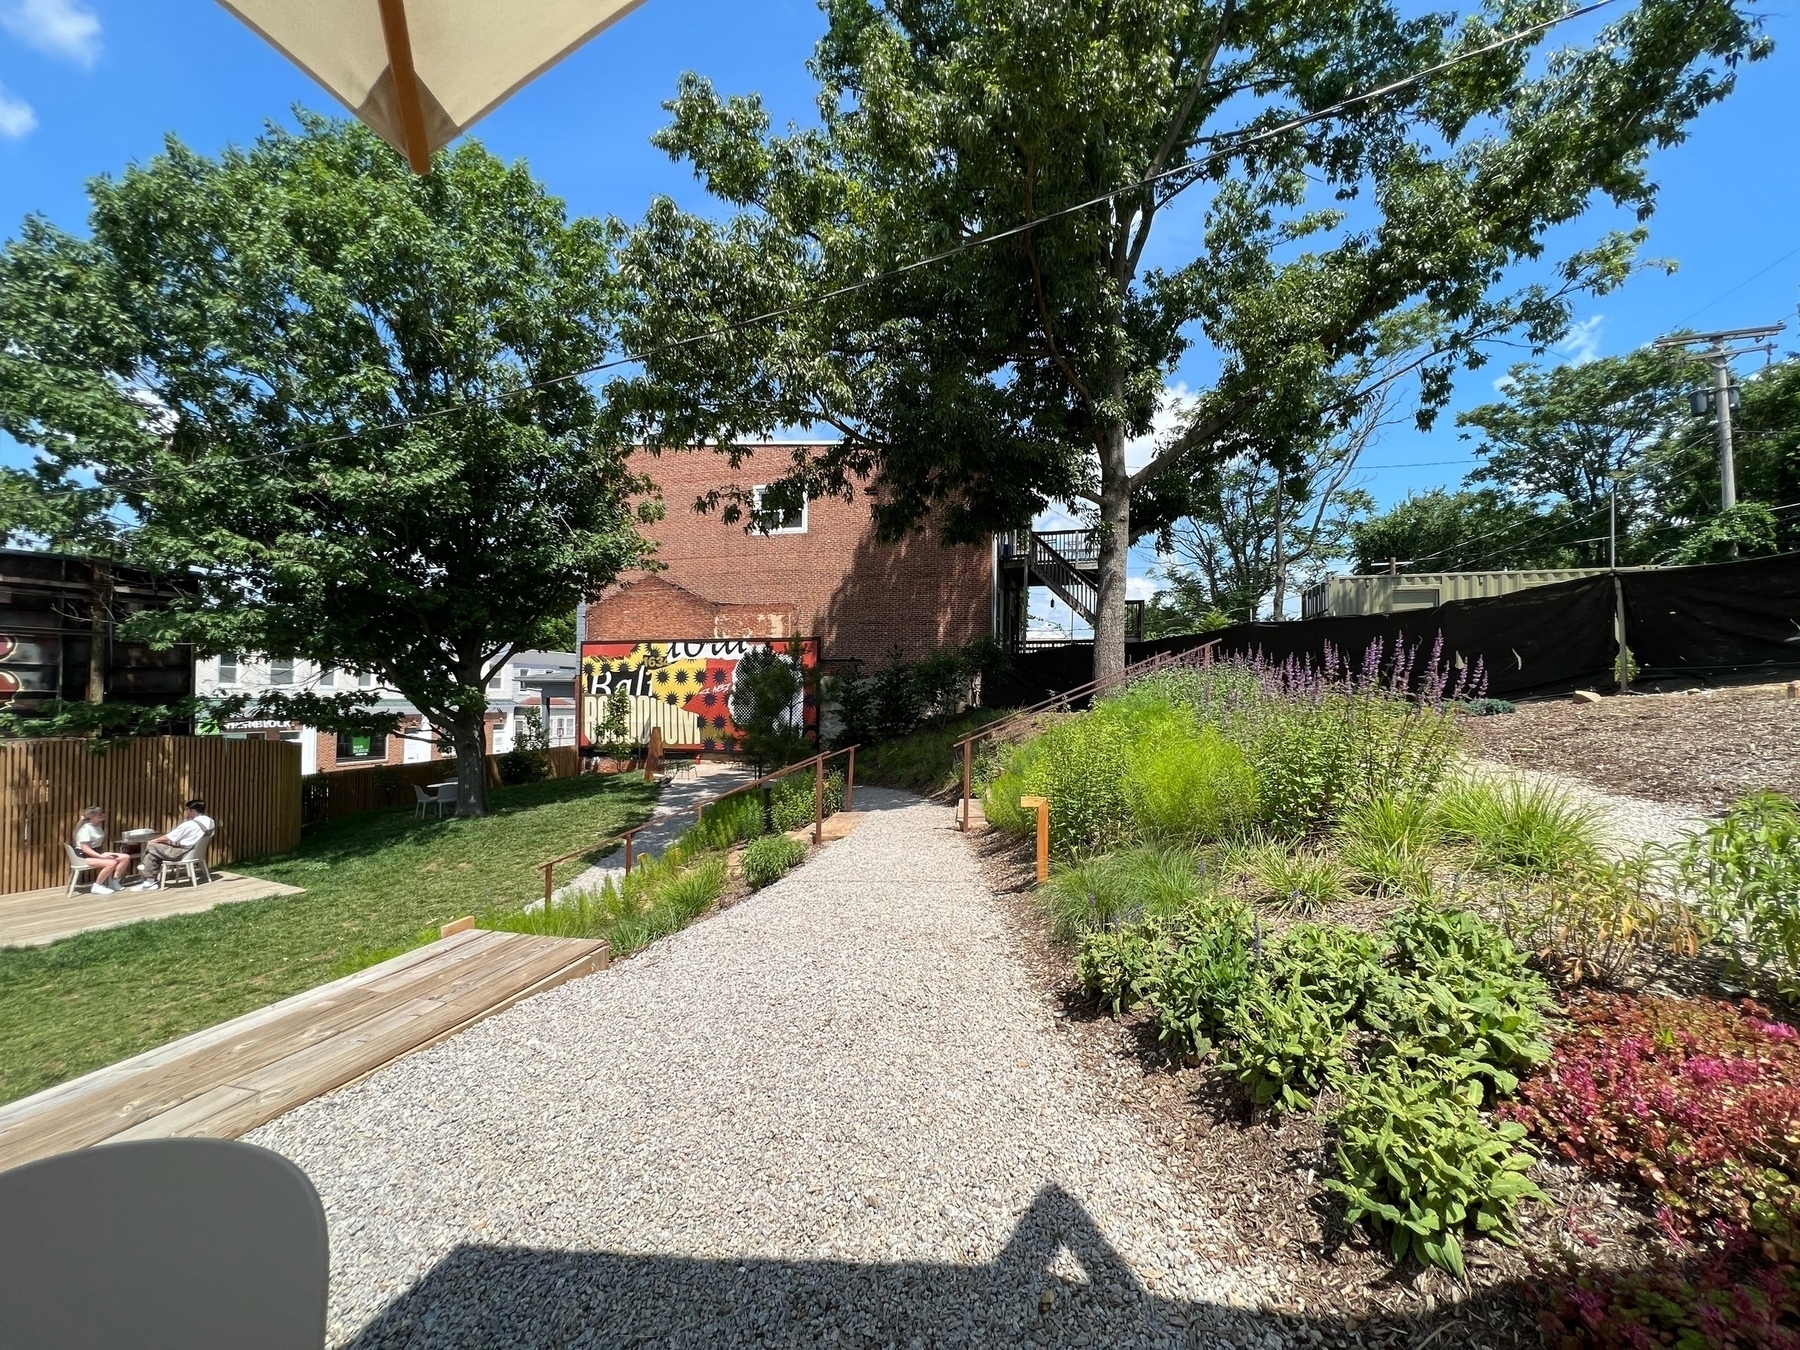 Outdoor view at good neighbor coffee shop, which is a terraced garden with gravel and wood steps in the foreground and a small lawn and tree in the background. There&rsquo;s also a Baltimore billboard on the property against a brick wall.